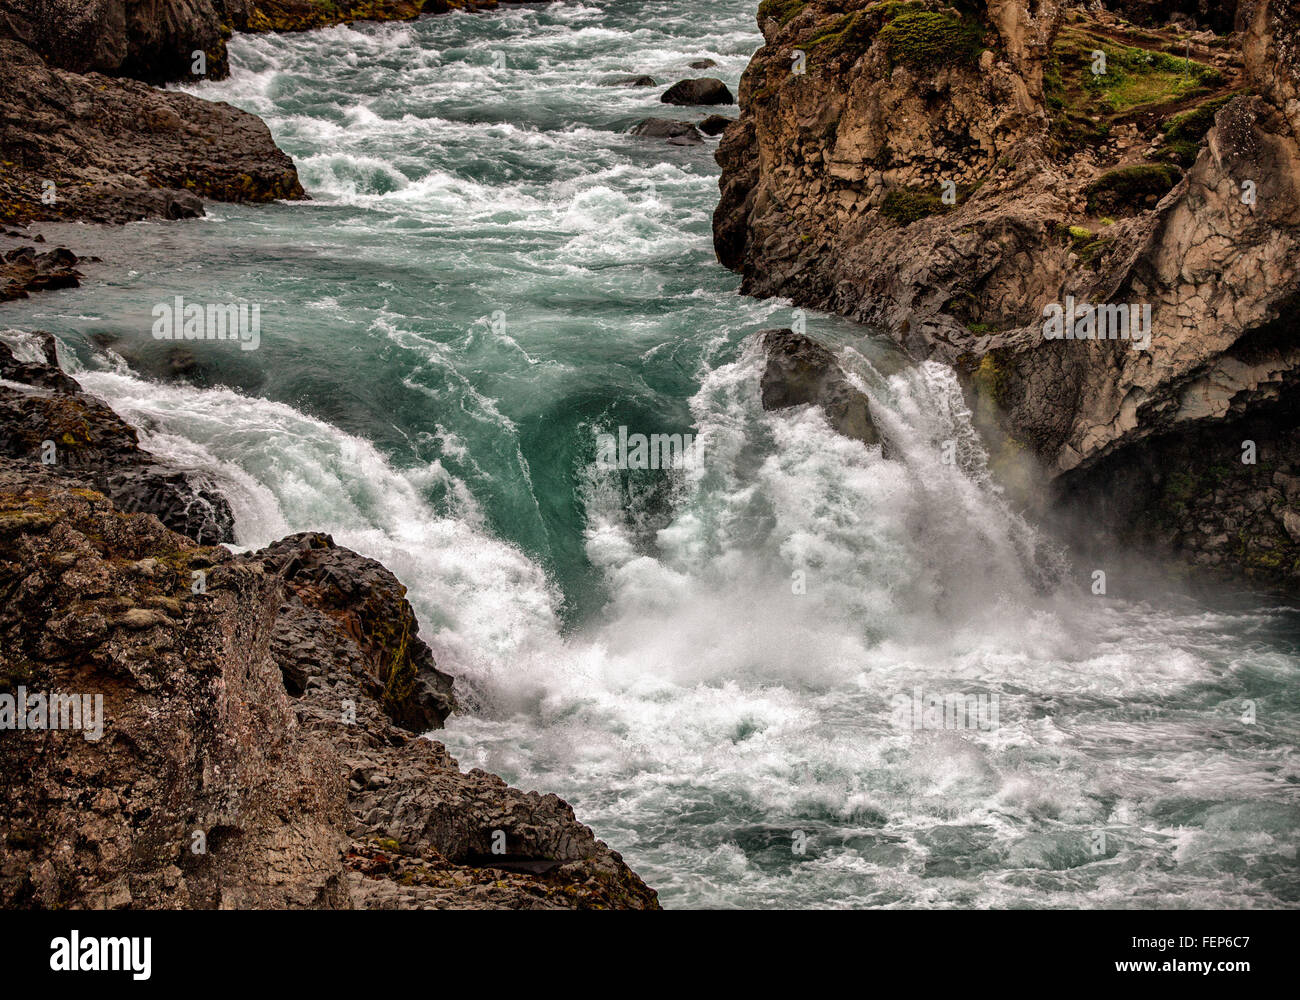 Aug. 1, 2015 - BÃ¡RÃ°Ardalur District, North-Central Iceland, Iceland - Geitafoss is a smaller, but no-less-powerful, waterfall on the SkjÃ¡lfandafljÃ³t river, just downstream from the spectacular, popular, famed GoÃ°afoss falls. Below the Godafoss falls, the river flows through a narrow cataract 50-75 ft (15-23 m) wide with violent wave action and much froth and spume. Tourism has become a growing sector of the economy and Iceland has become a favorite tourist destination. © Arnold Drapkin/ZUMA Wire/Alamy Live News Stock Photo